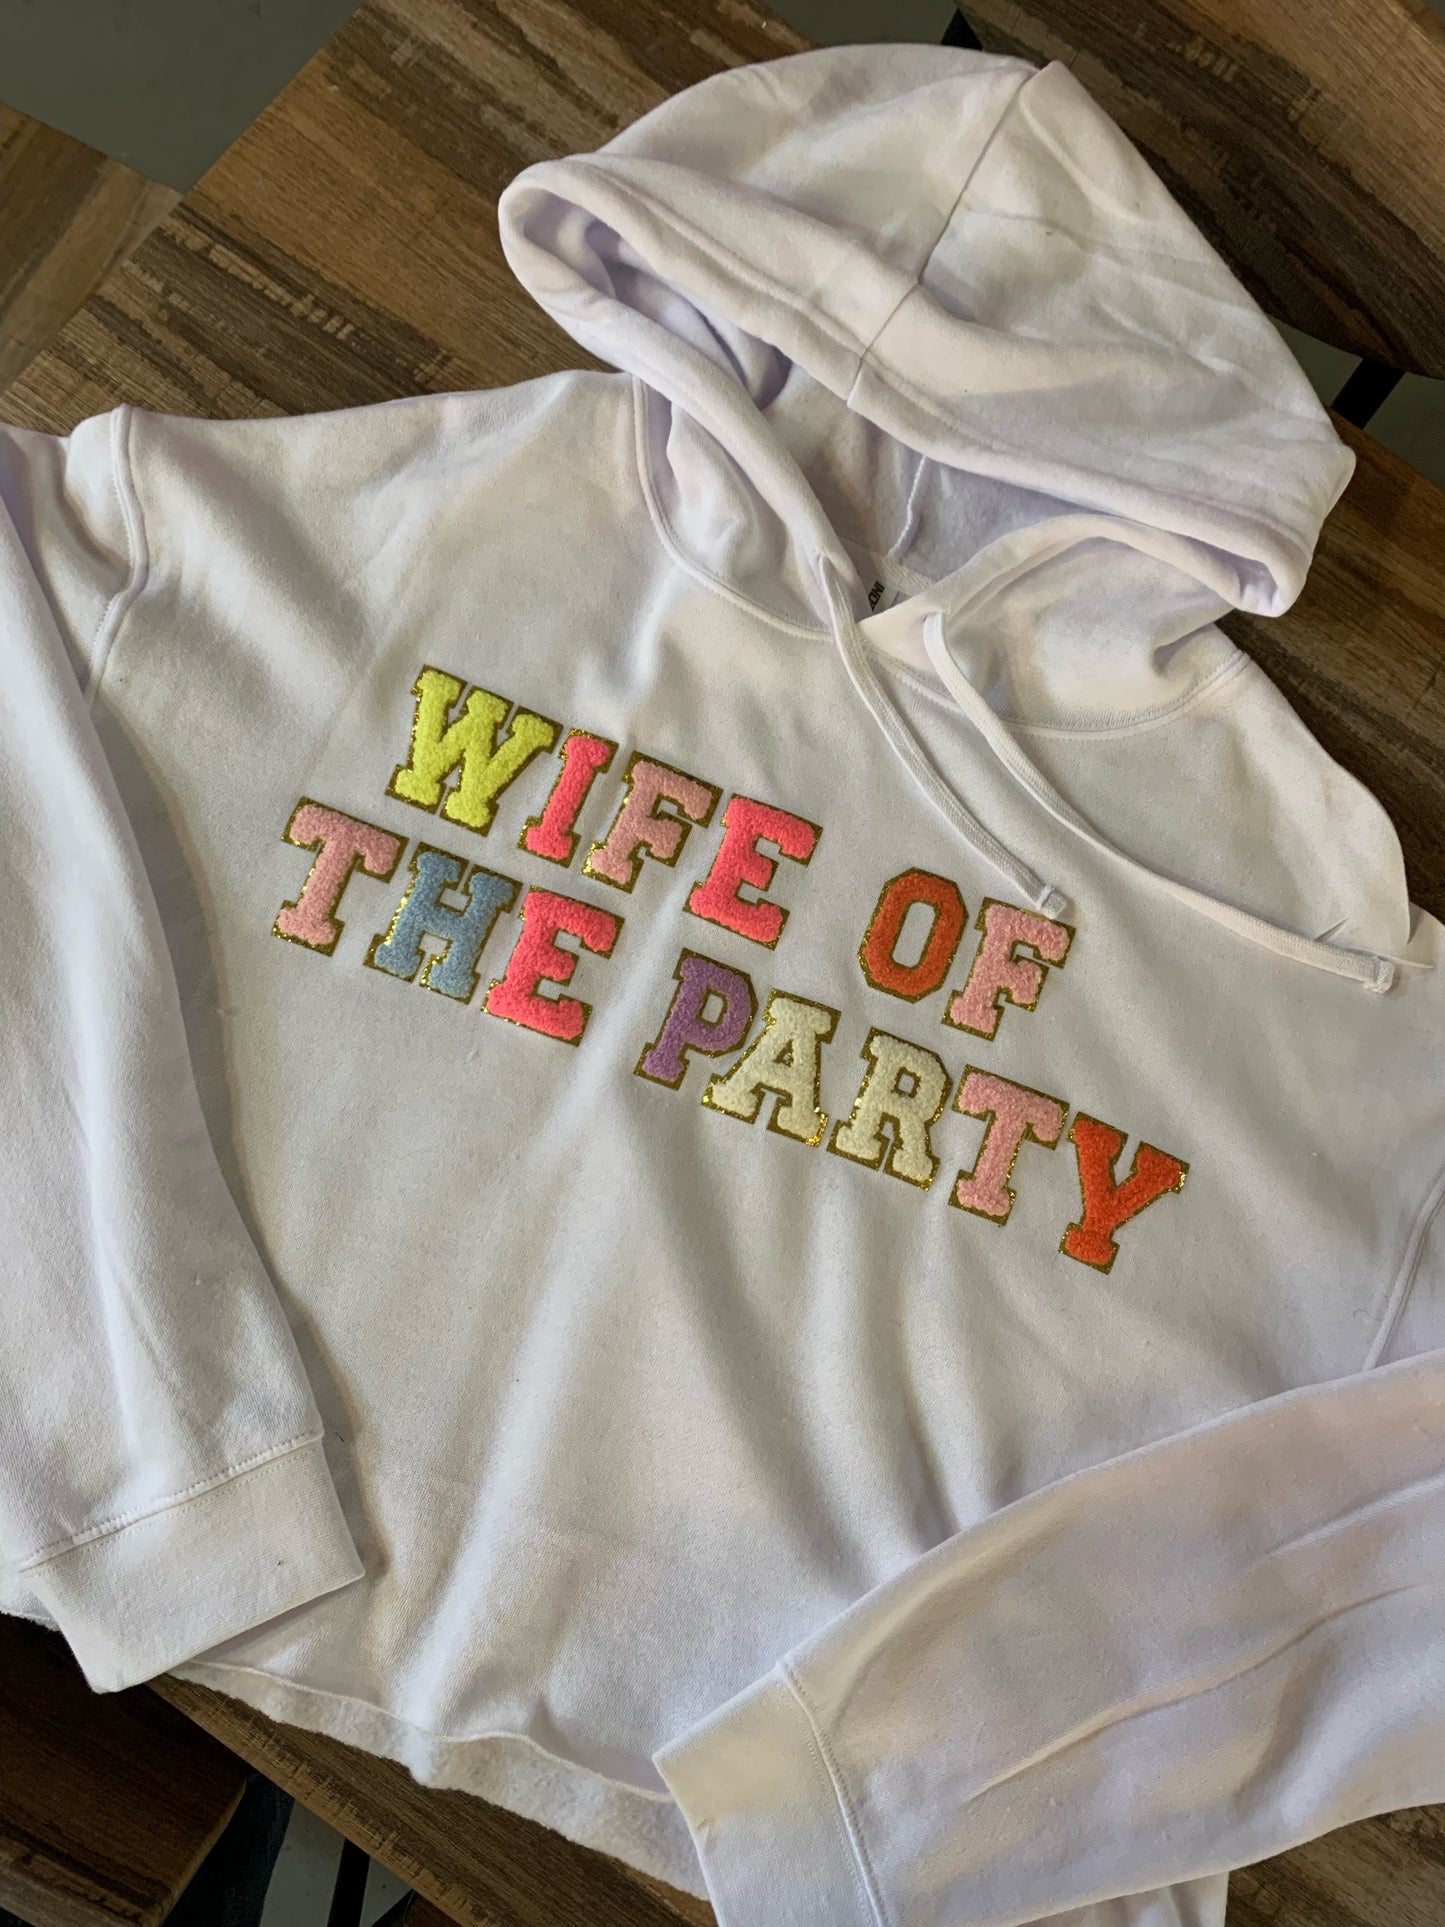 Wife Of The Party